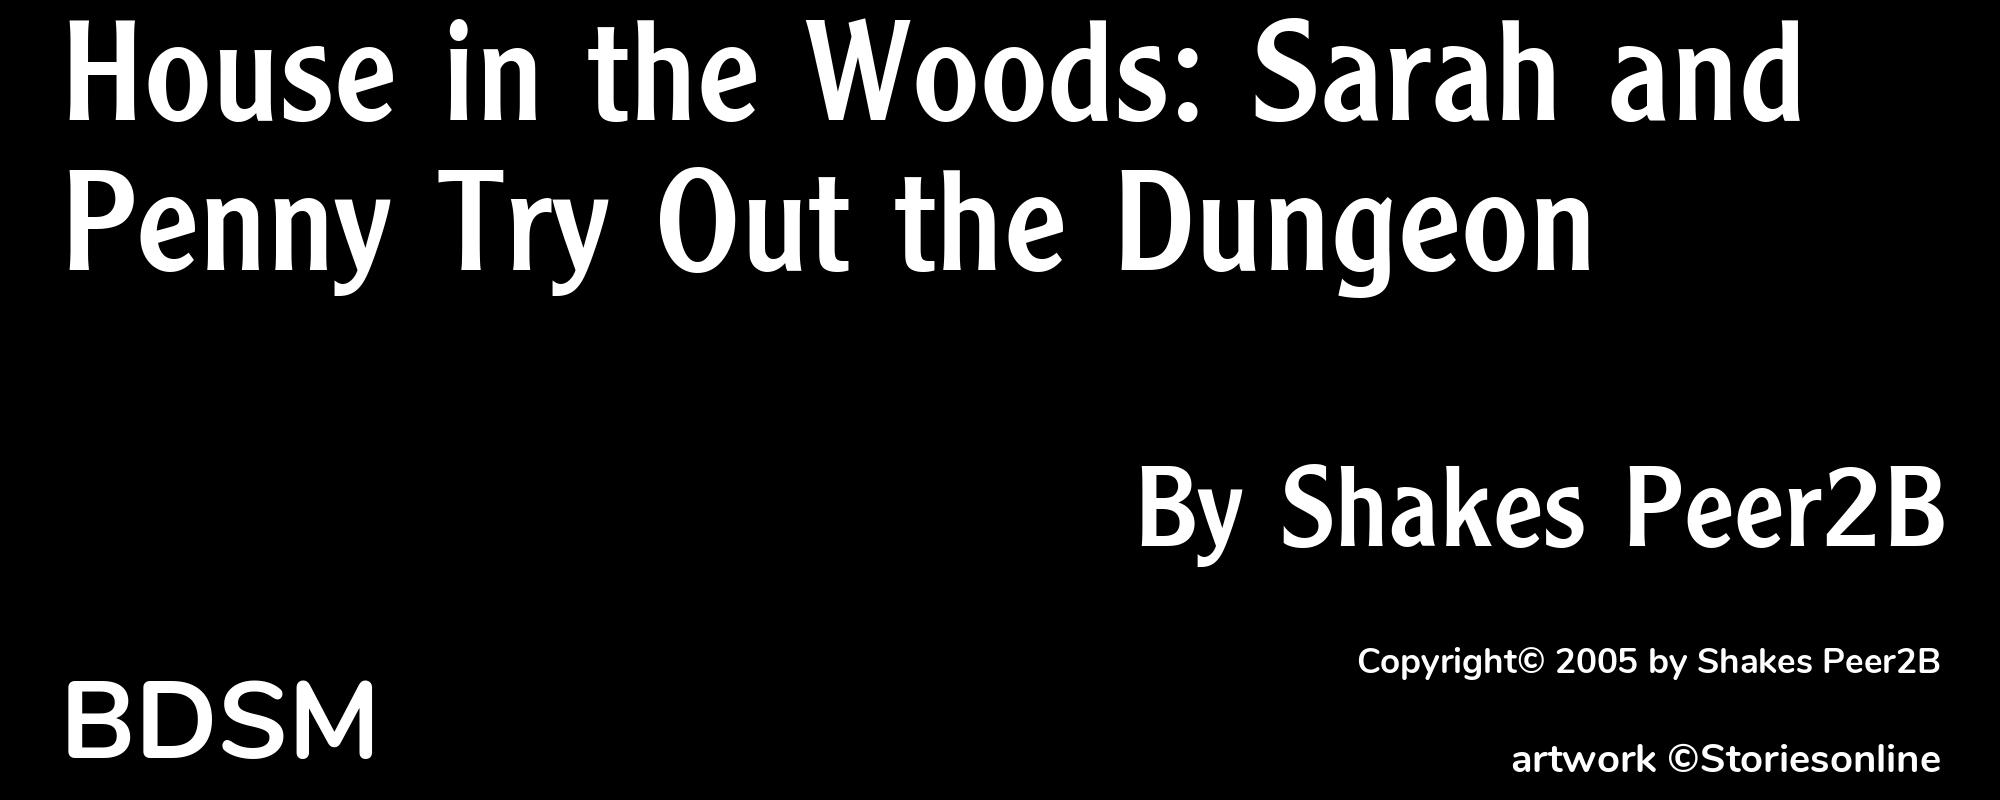 House in the Woods: Sarah and Penny Try Out the Dungeon - Cover